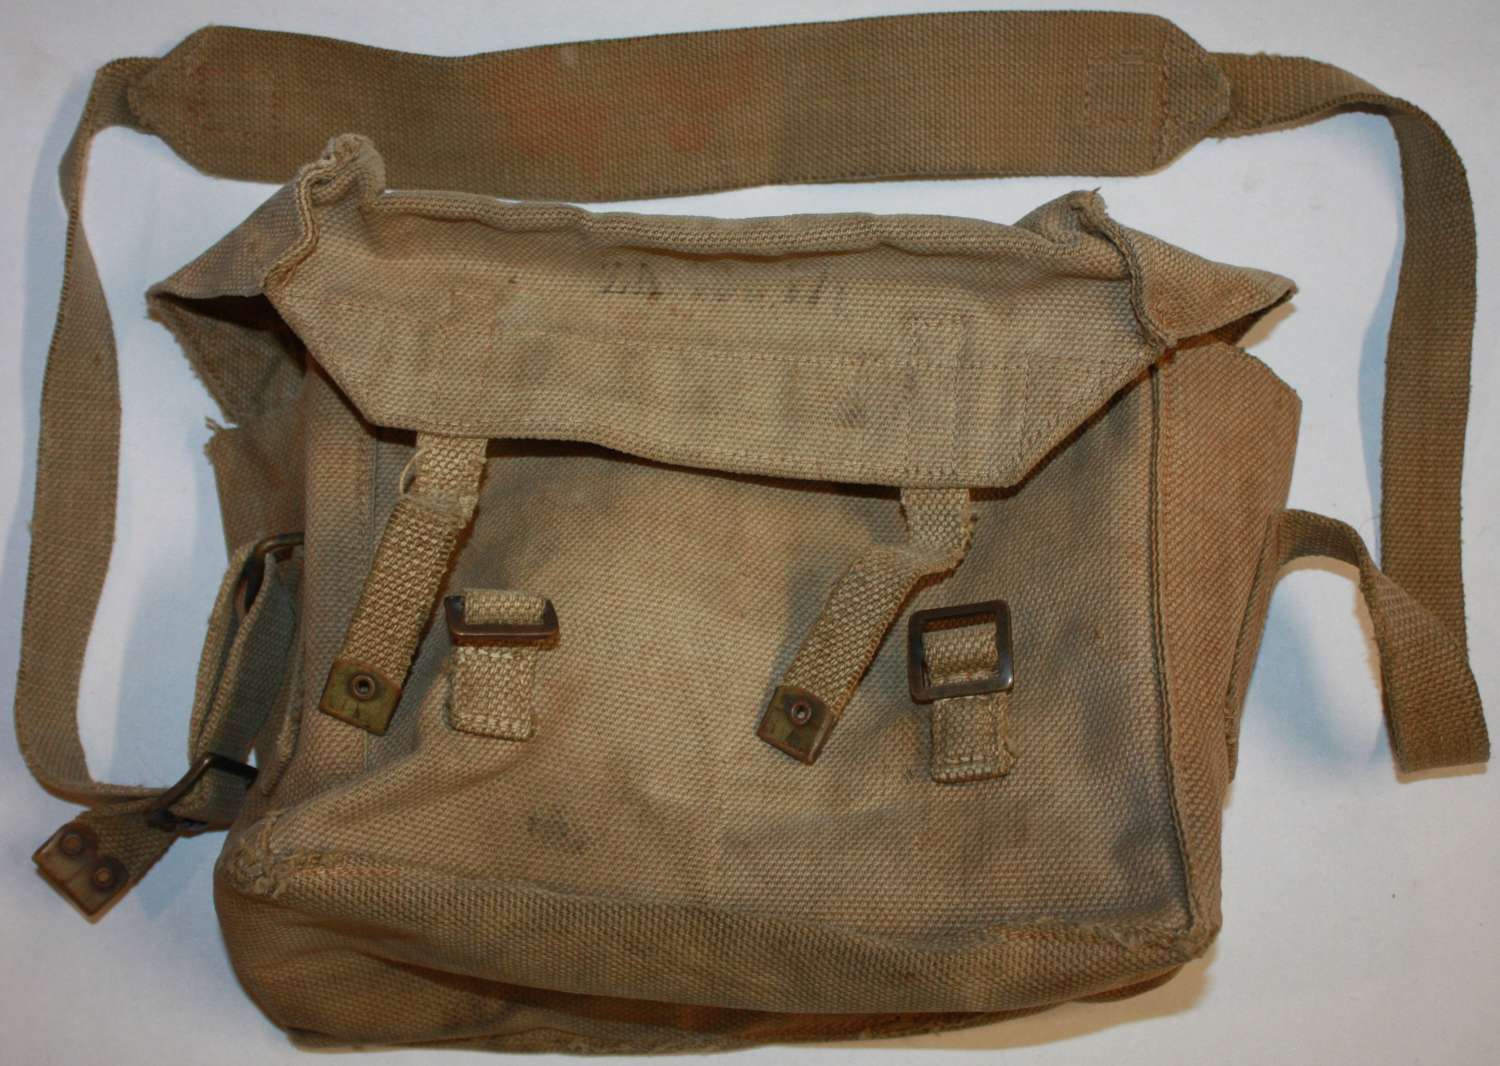 A WWII RADIO BATTERY BAG WHICH HAS HAD THE INTERNAL DIVIDER REMOVED